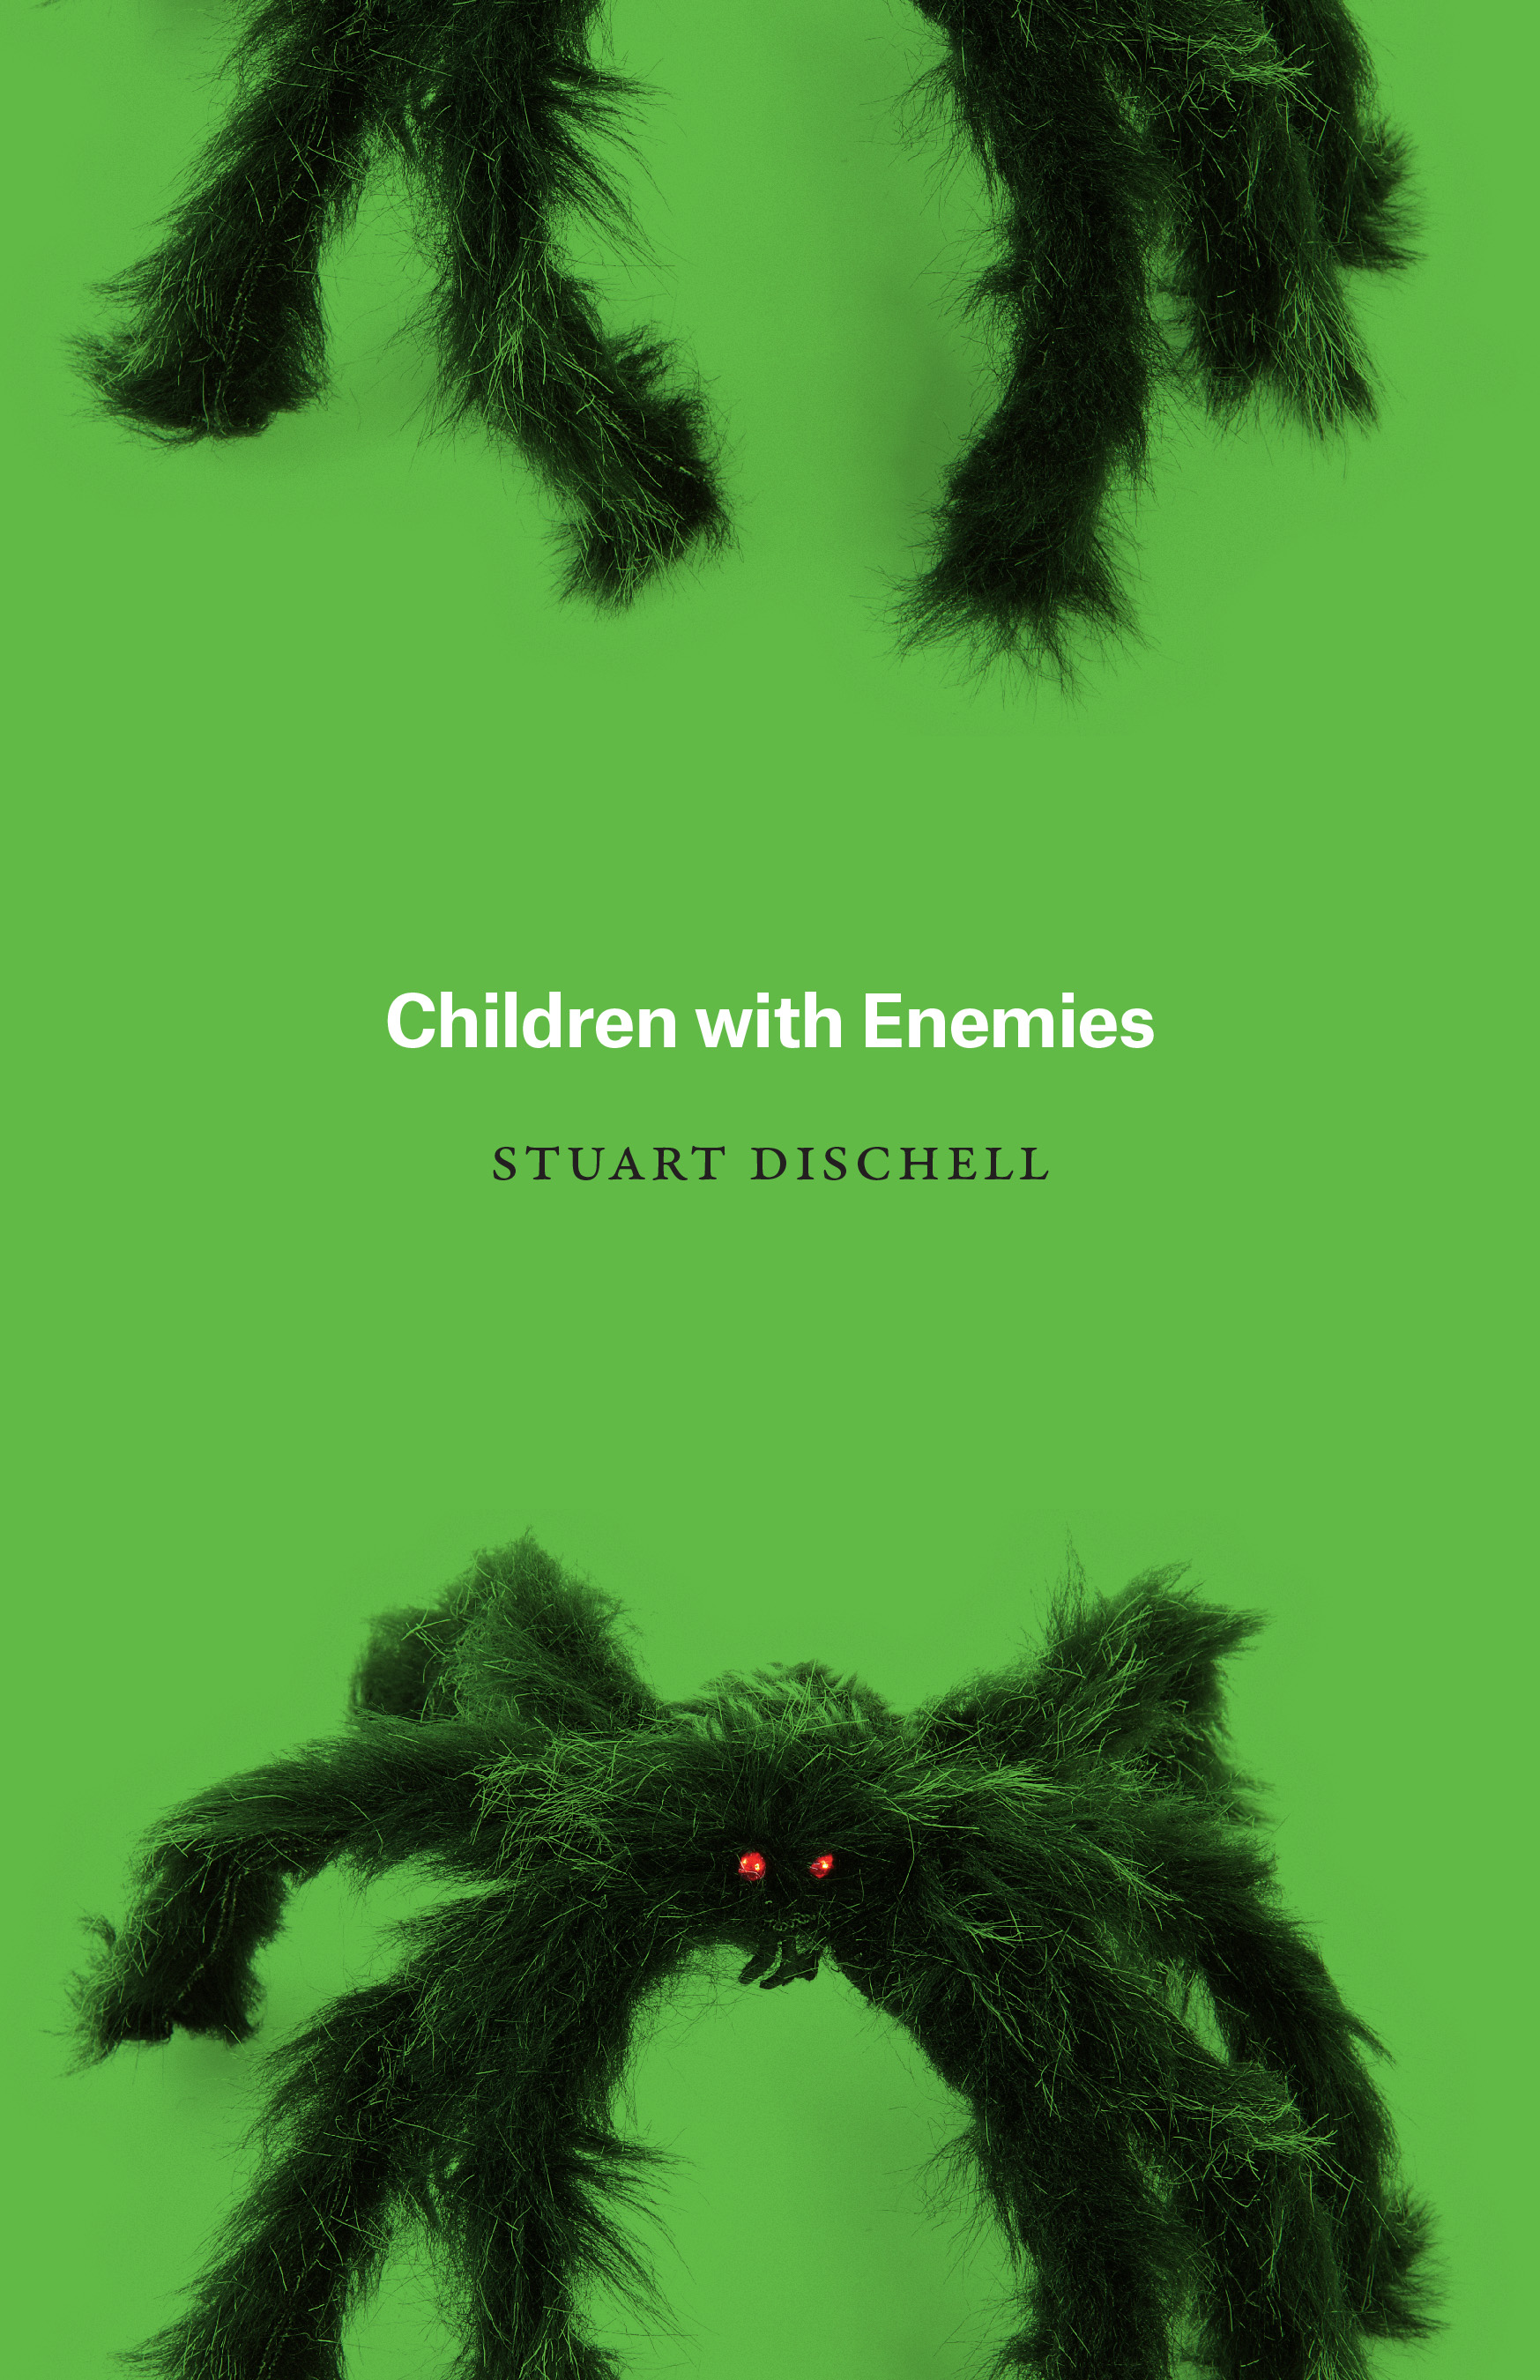 Children with Enemies book cover